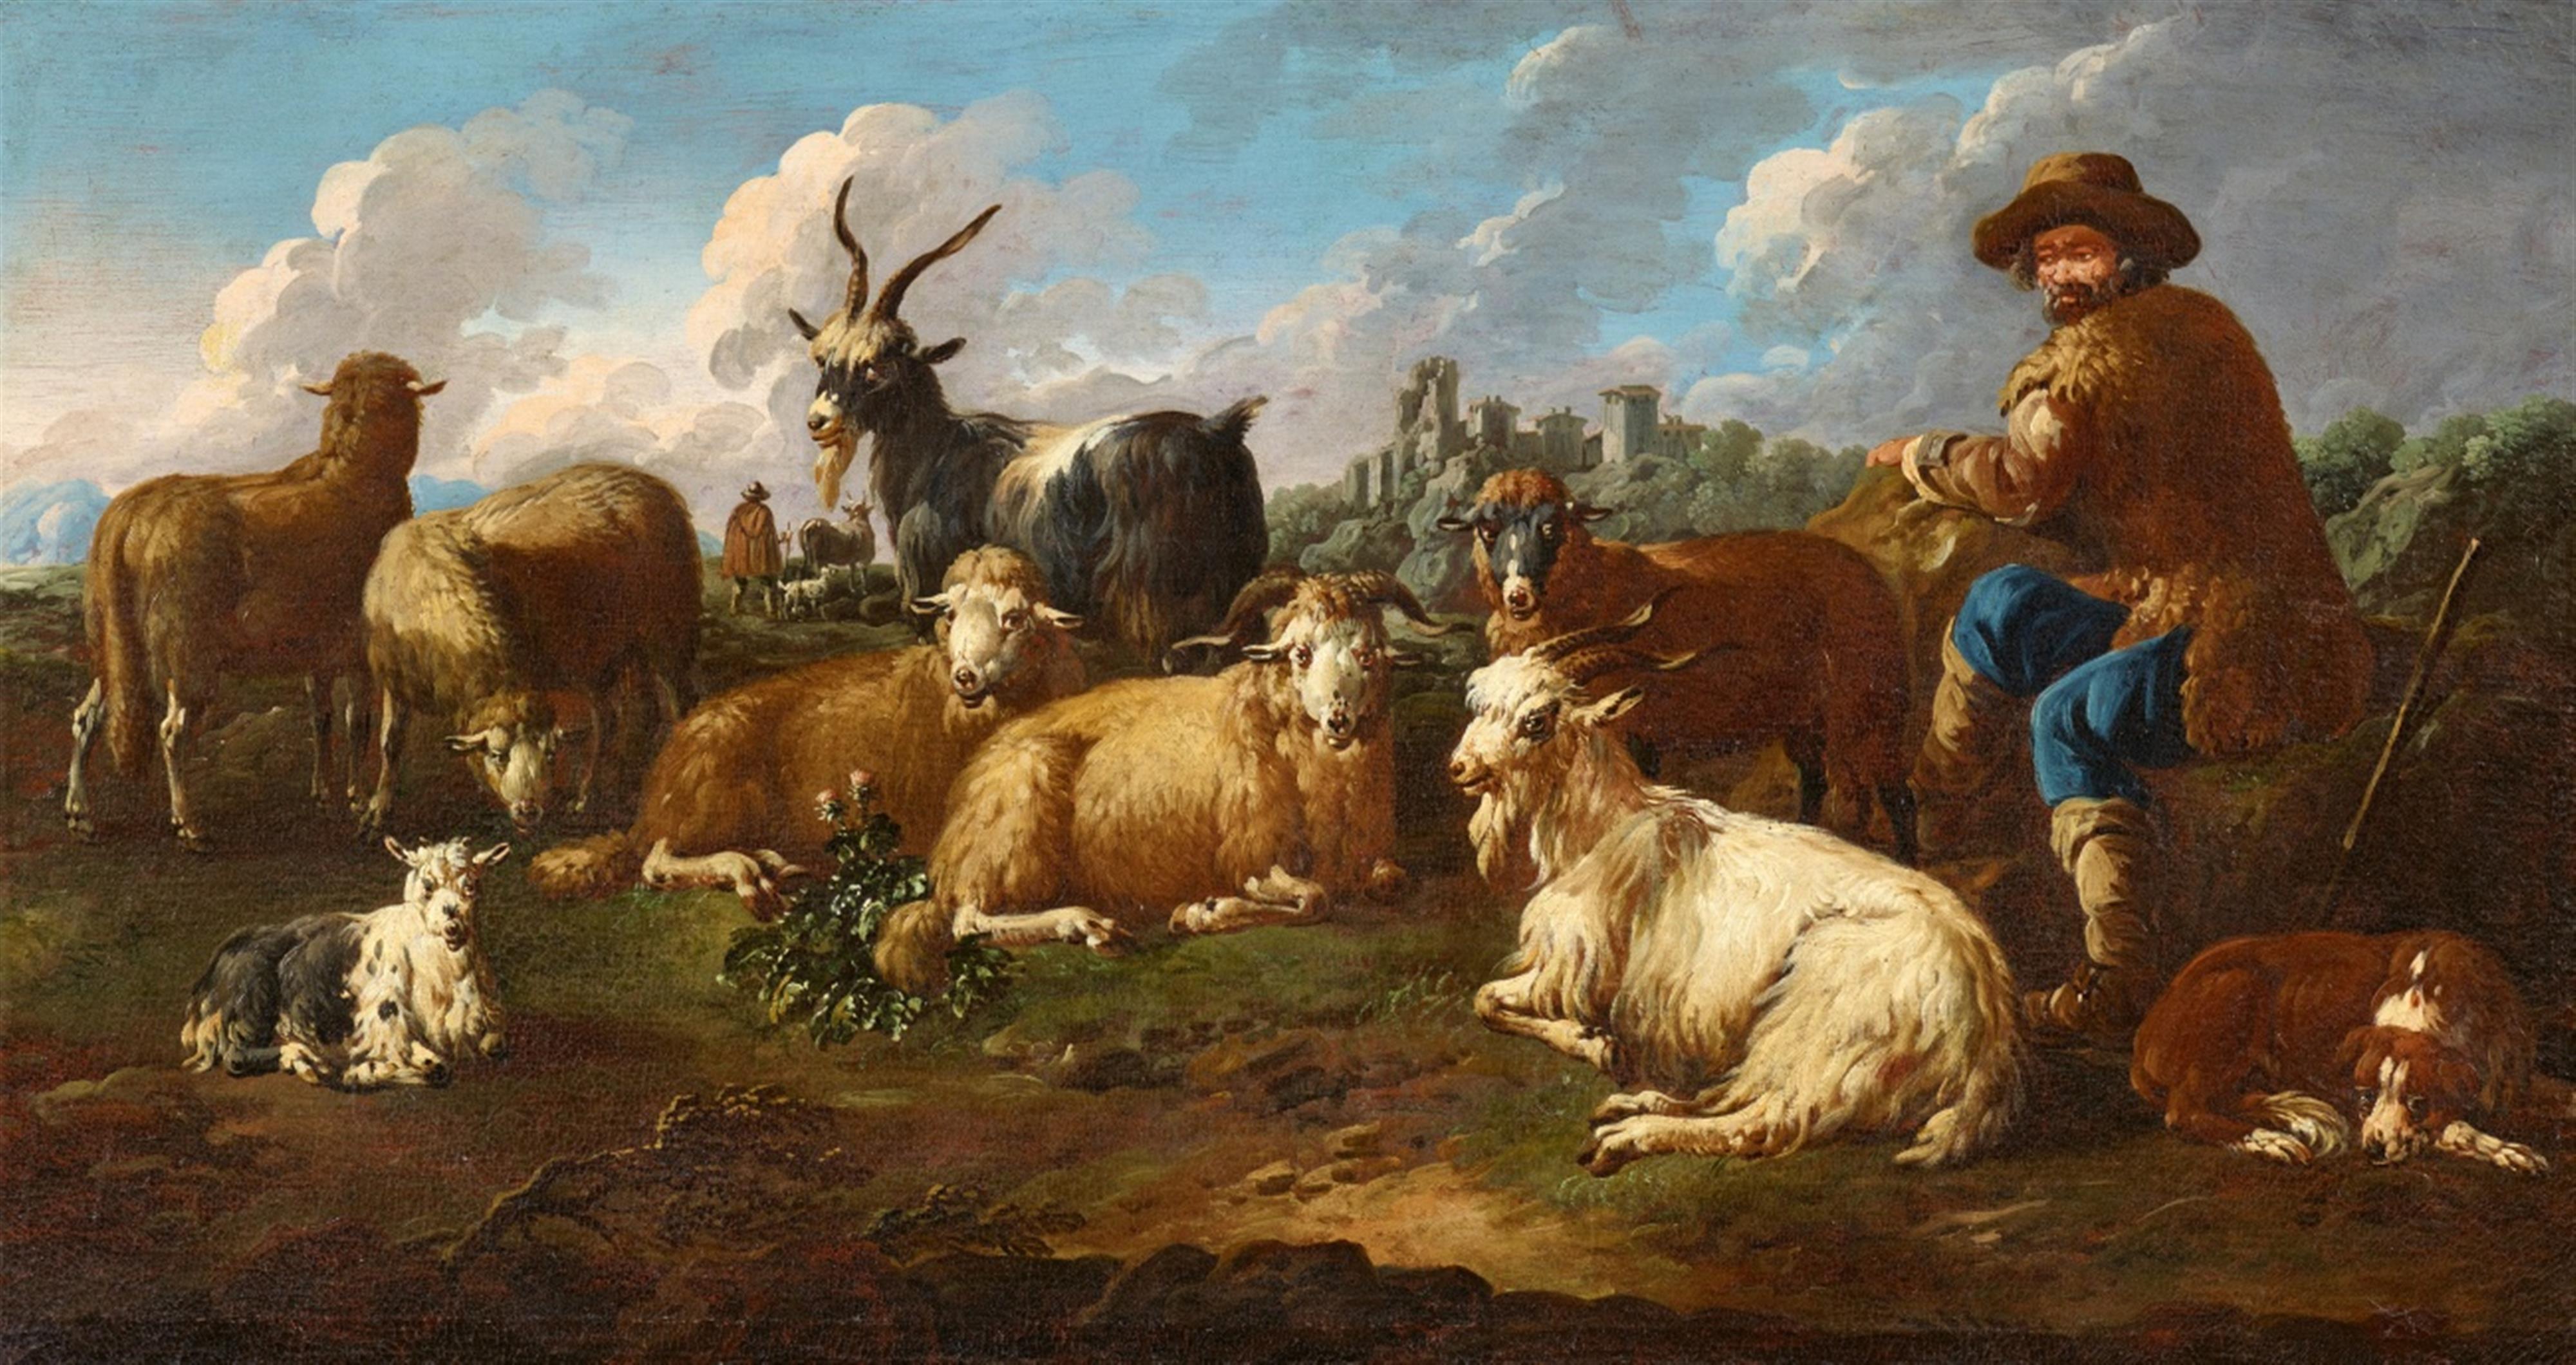 Philipp Peter Roos, called Rosa Da Tivoli - White deer hunt
Dogs hunting a bull
Shepherd with herd, a lamb and a horse
Herds with a resting shepherd
Herden mit einem ruhenden Schäfer - image-4